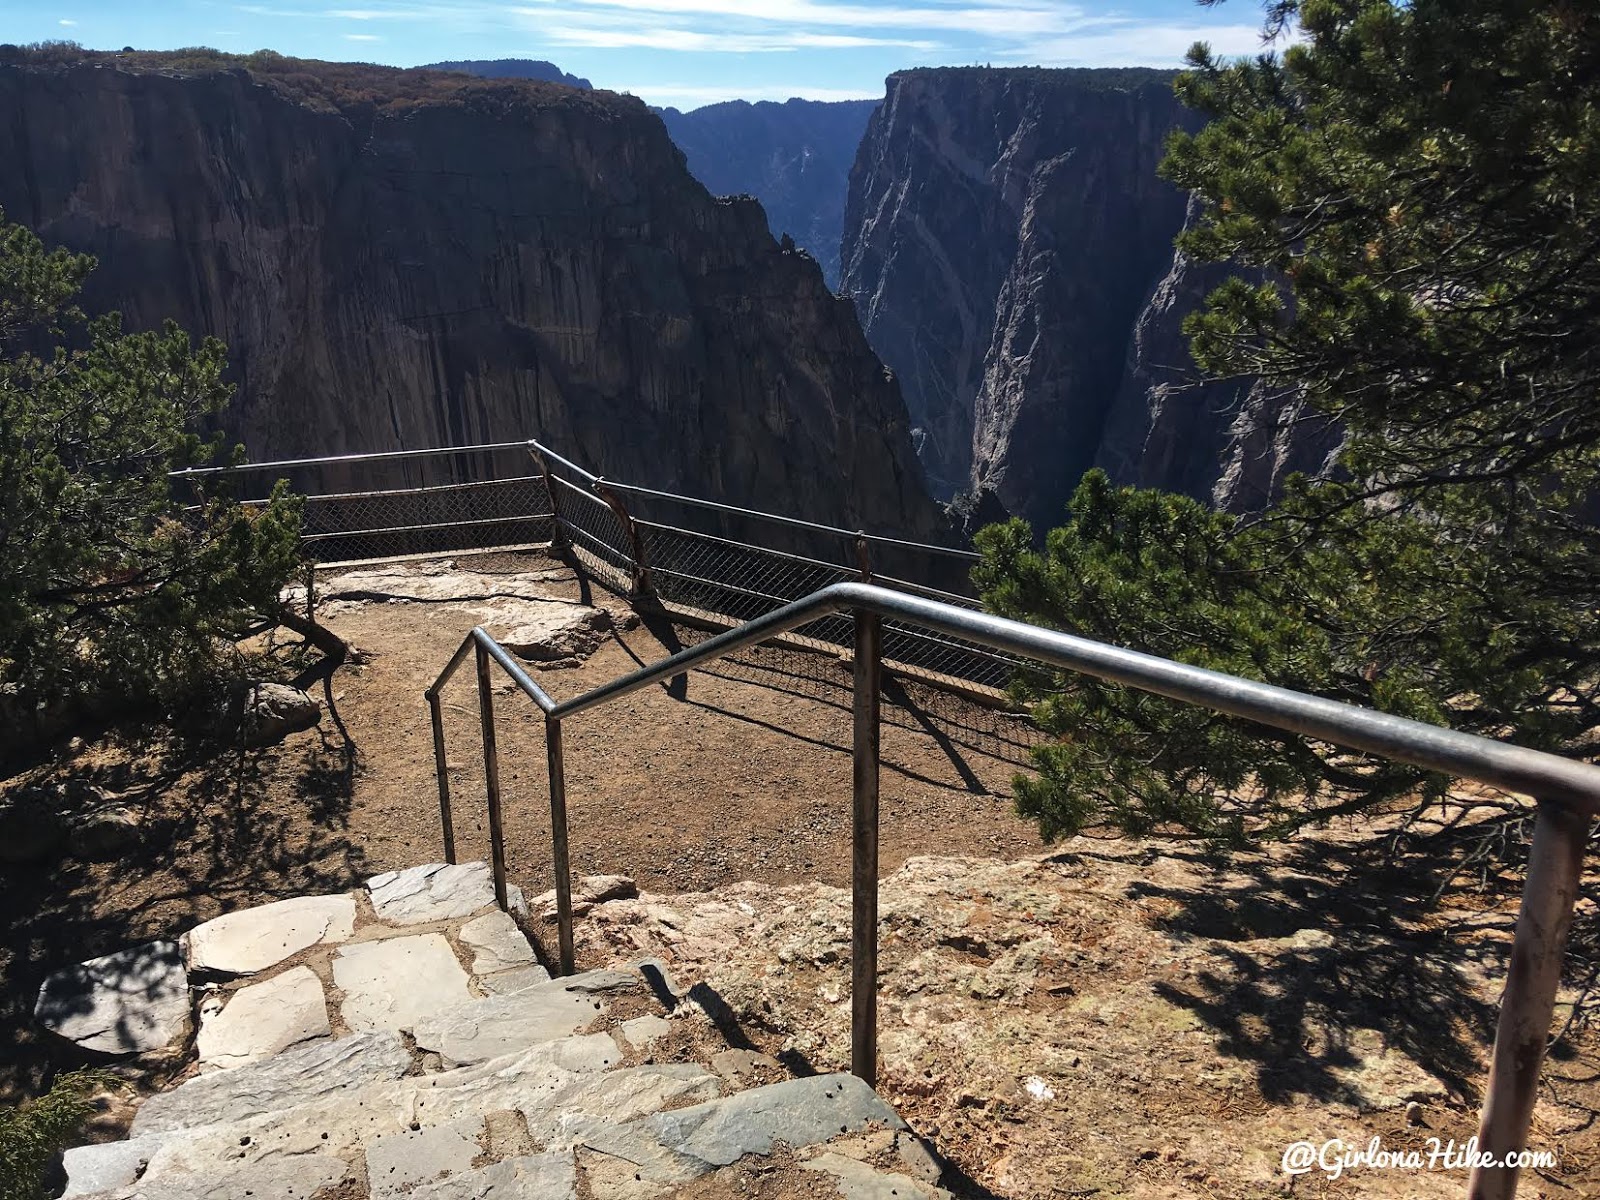 Hiking the North Vista Trail, Black Canyon of the Gunnison National Park, Chasm Nature Trail